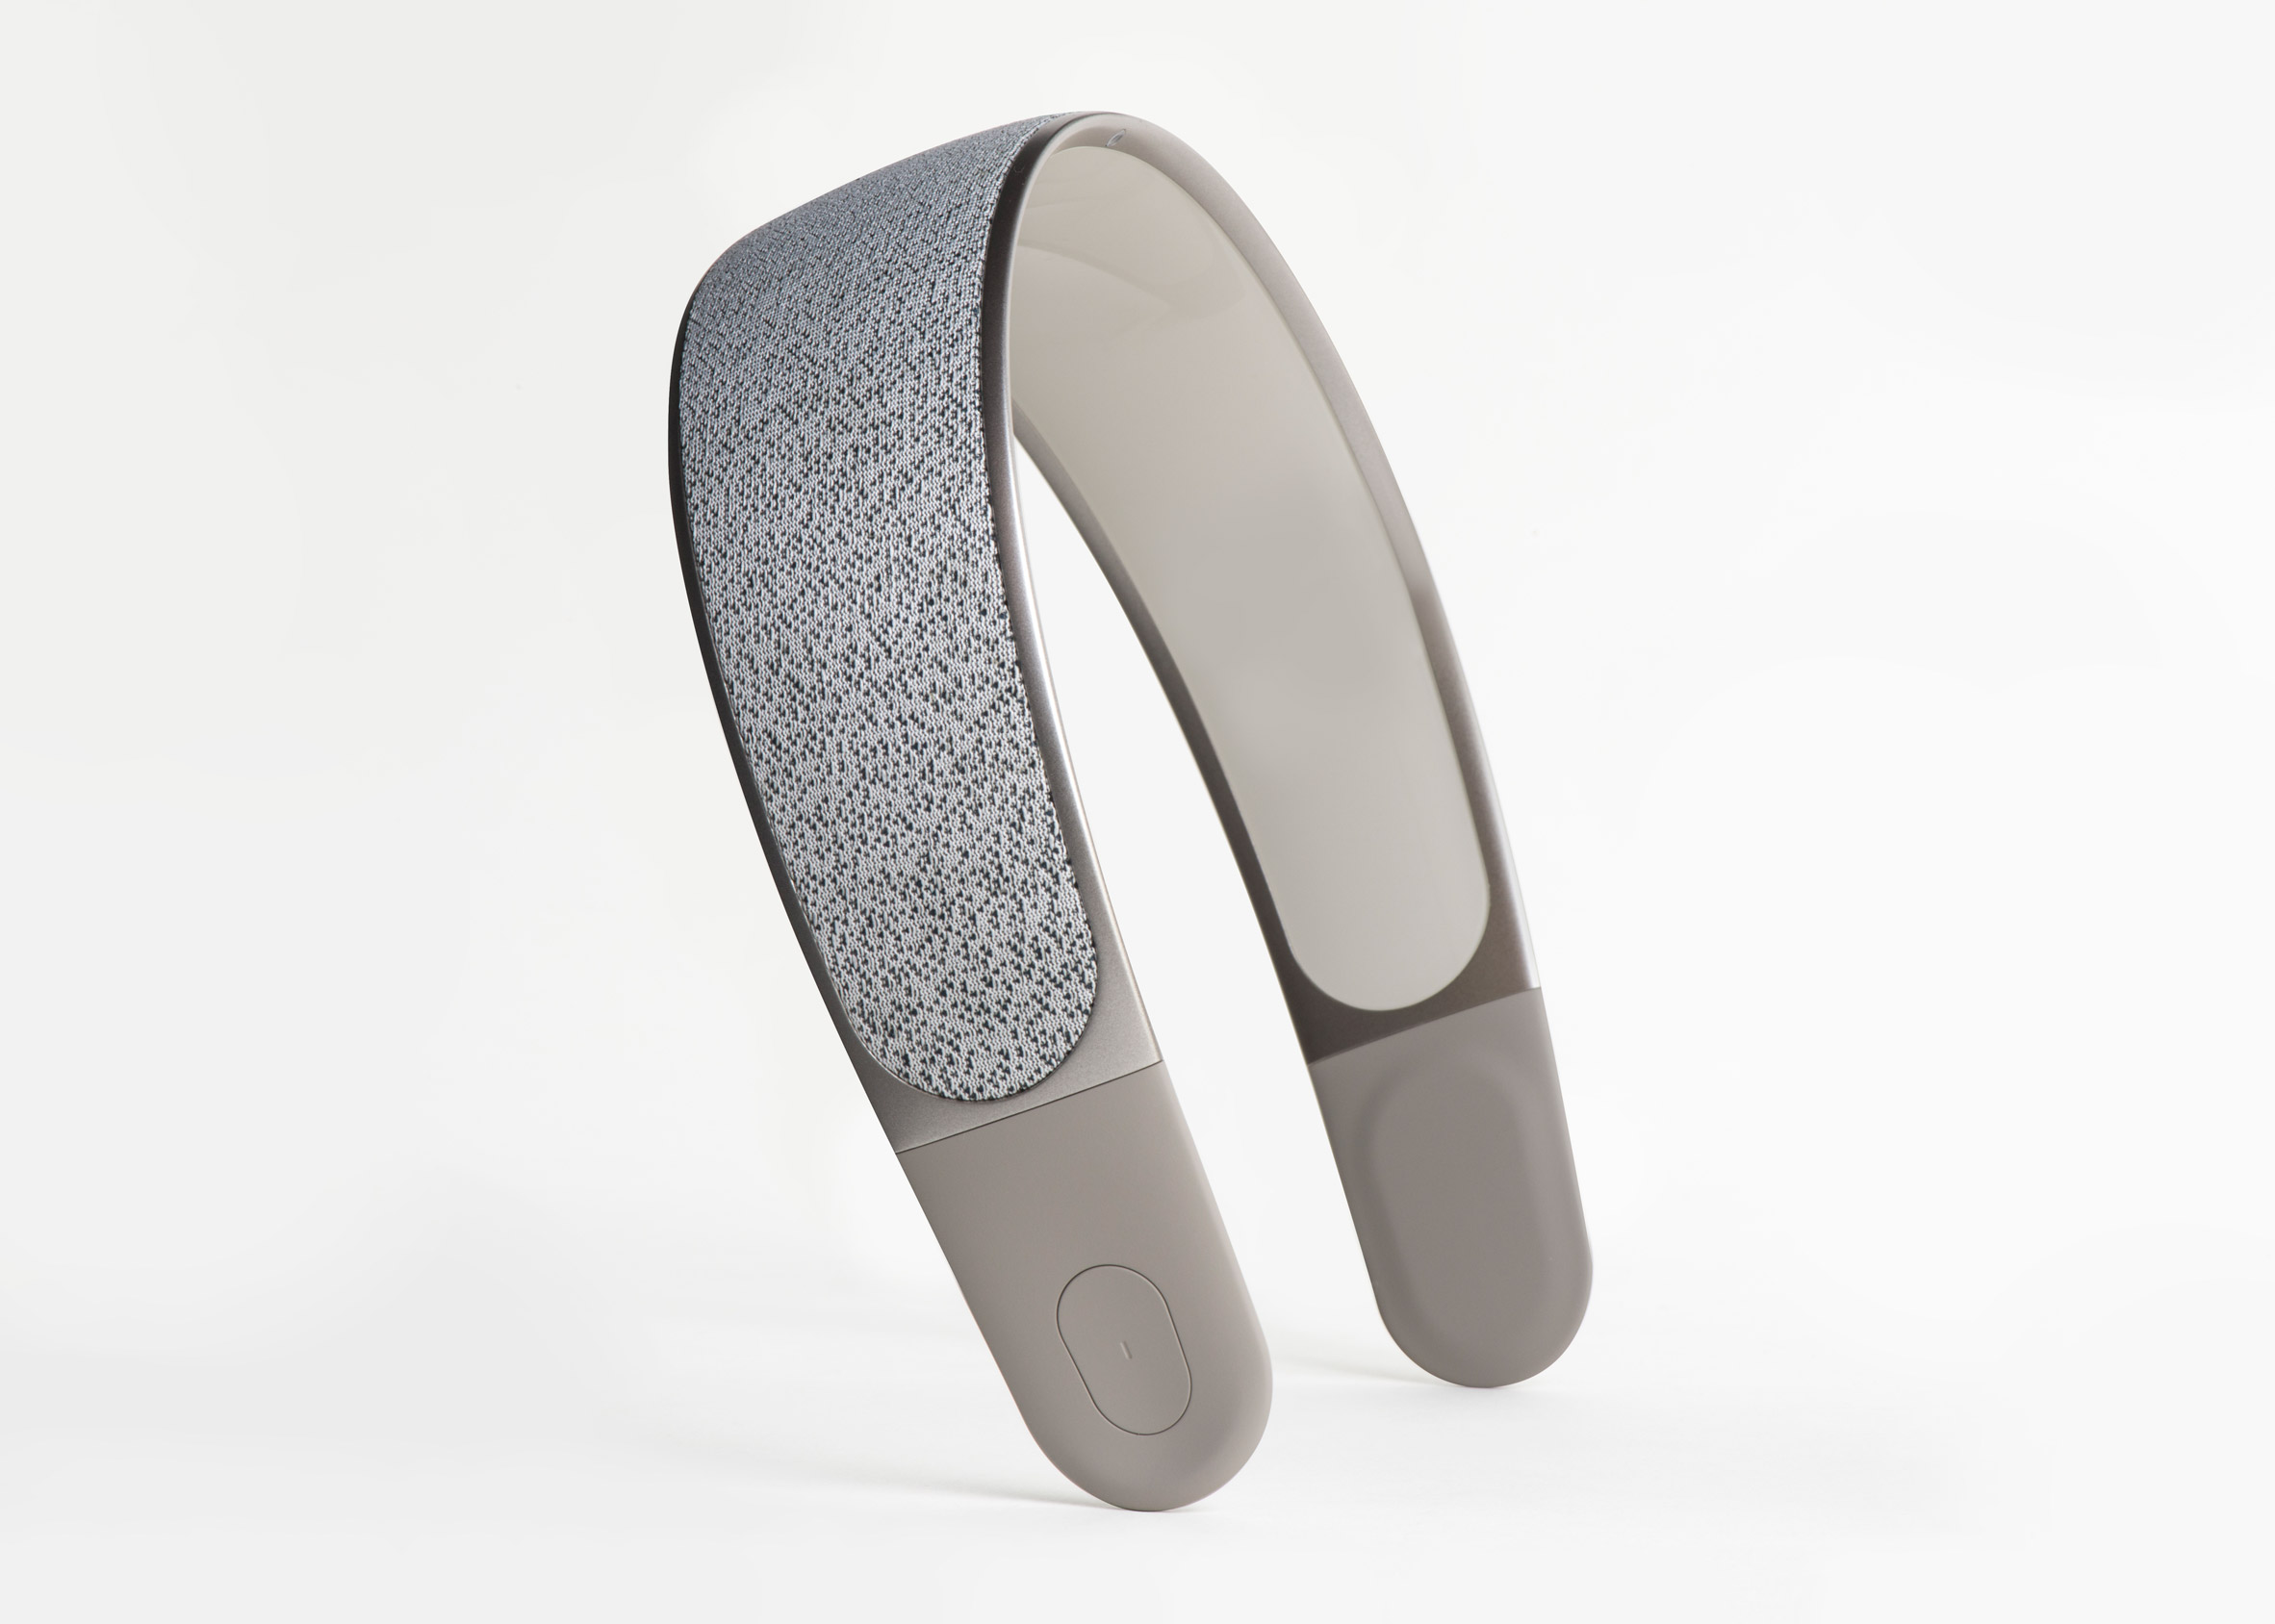 Layer and Panasonic's collection of smart devices aim to enhance your wellbeing